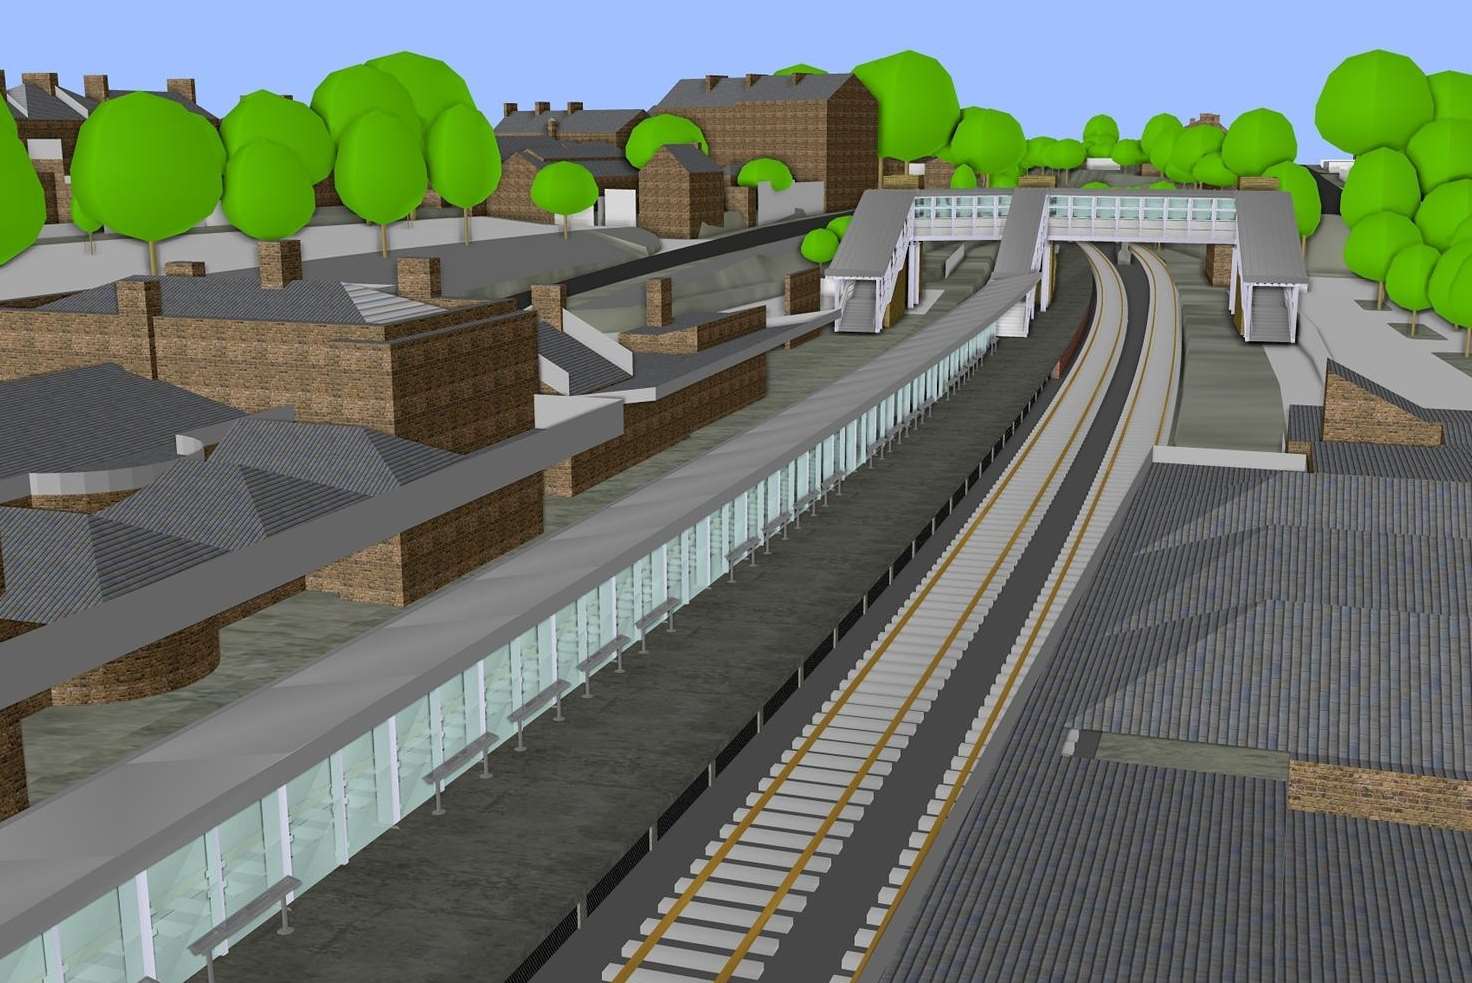 Network Rail used 4G virtual construction plans at Gravesend station to get three months' work done in 15 days